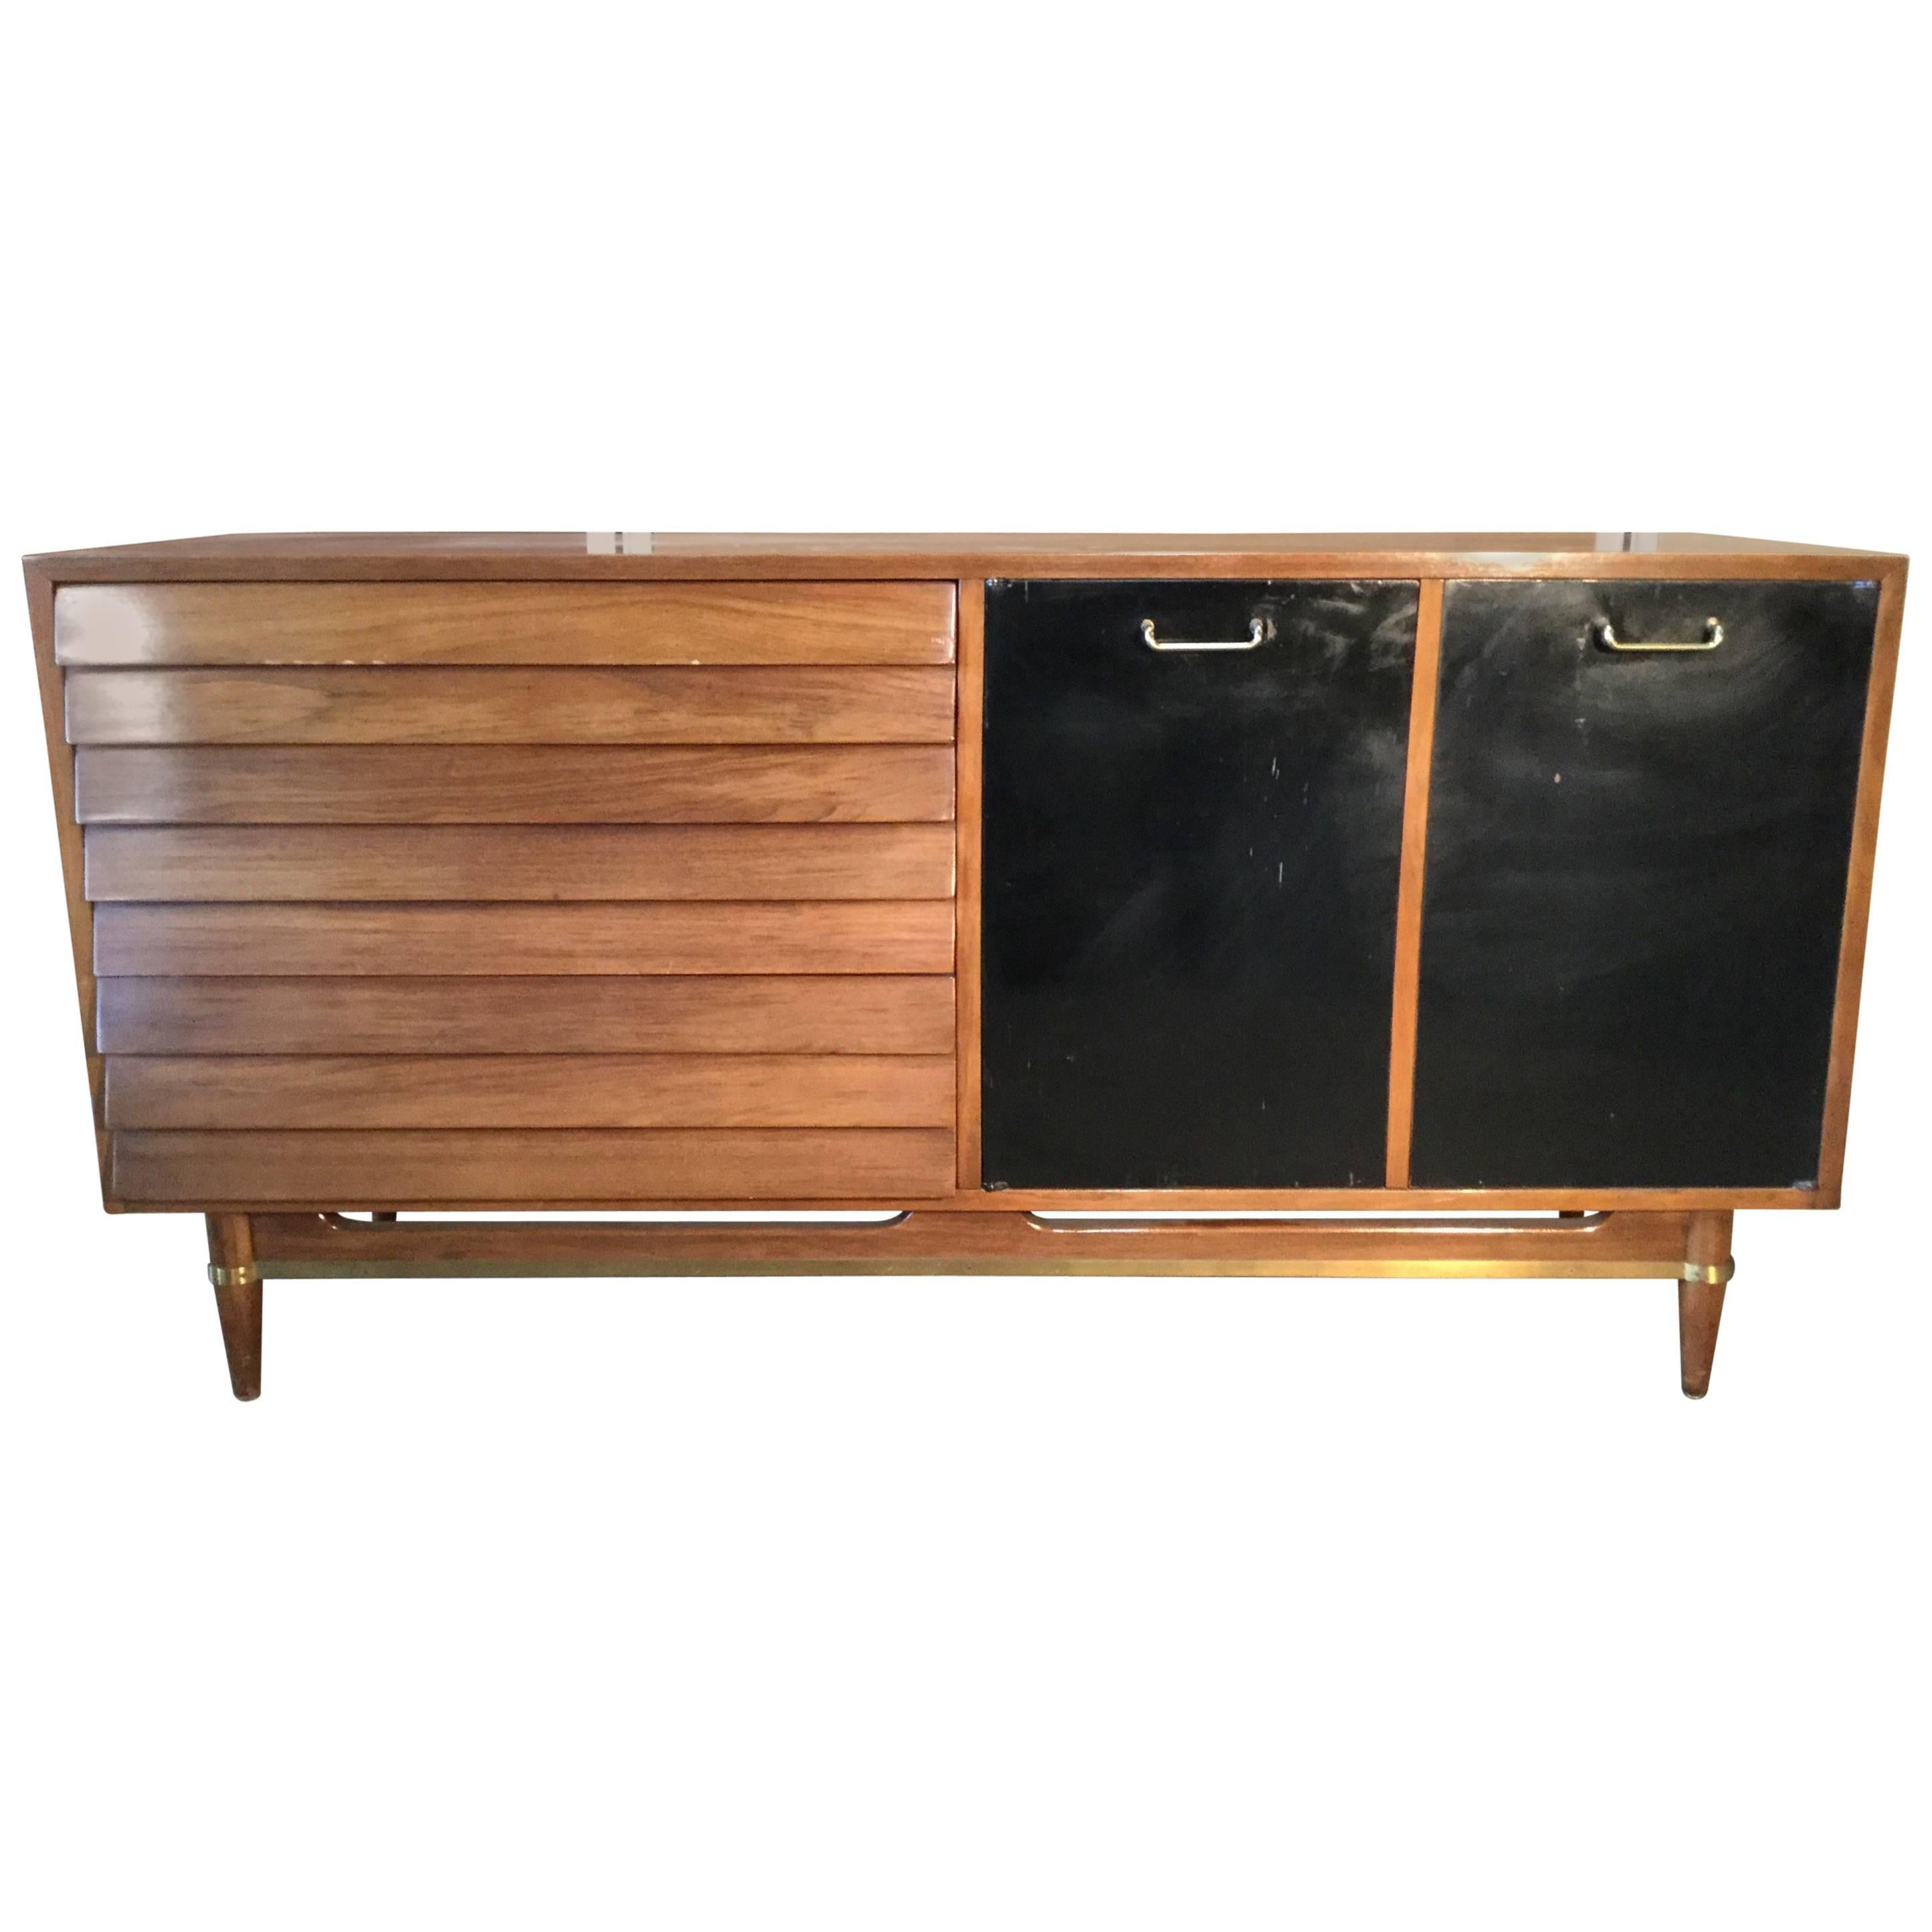 Classic Modernist Walnut and Brass Server or Credenza, American of Martinsville